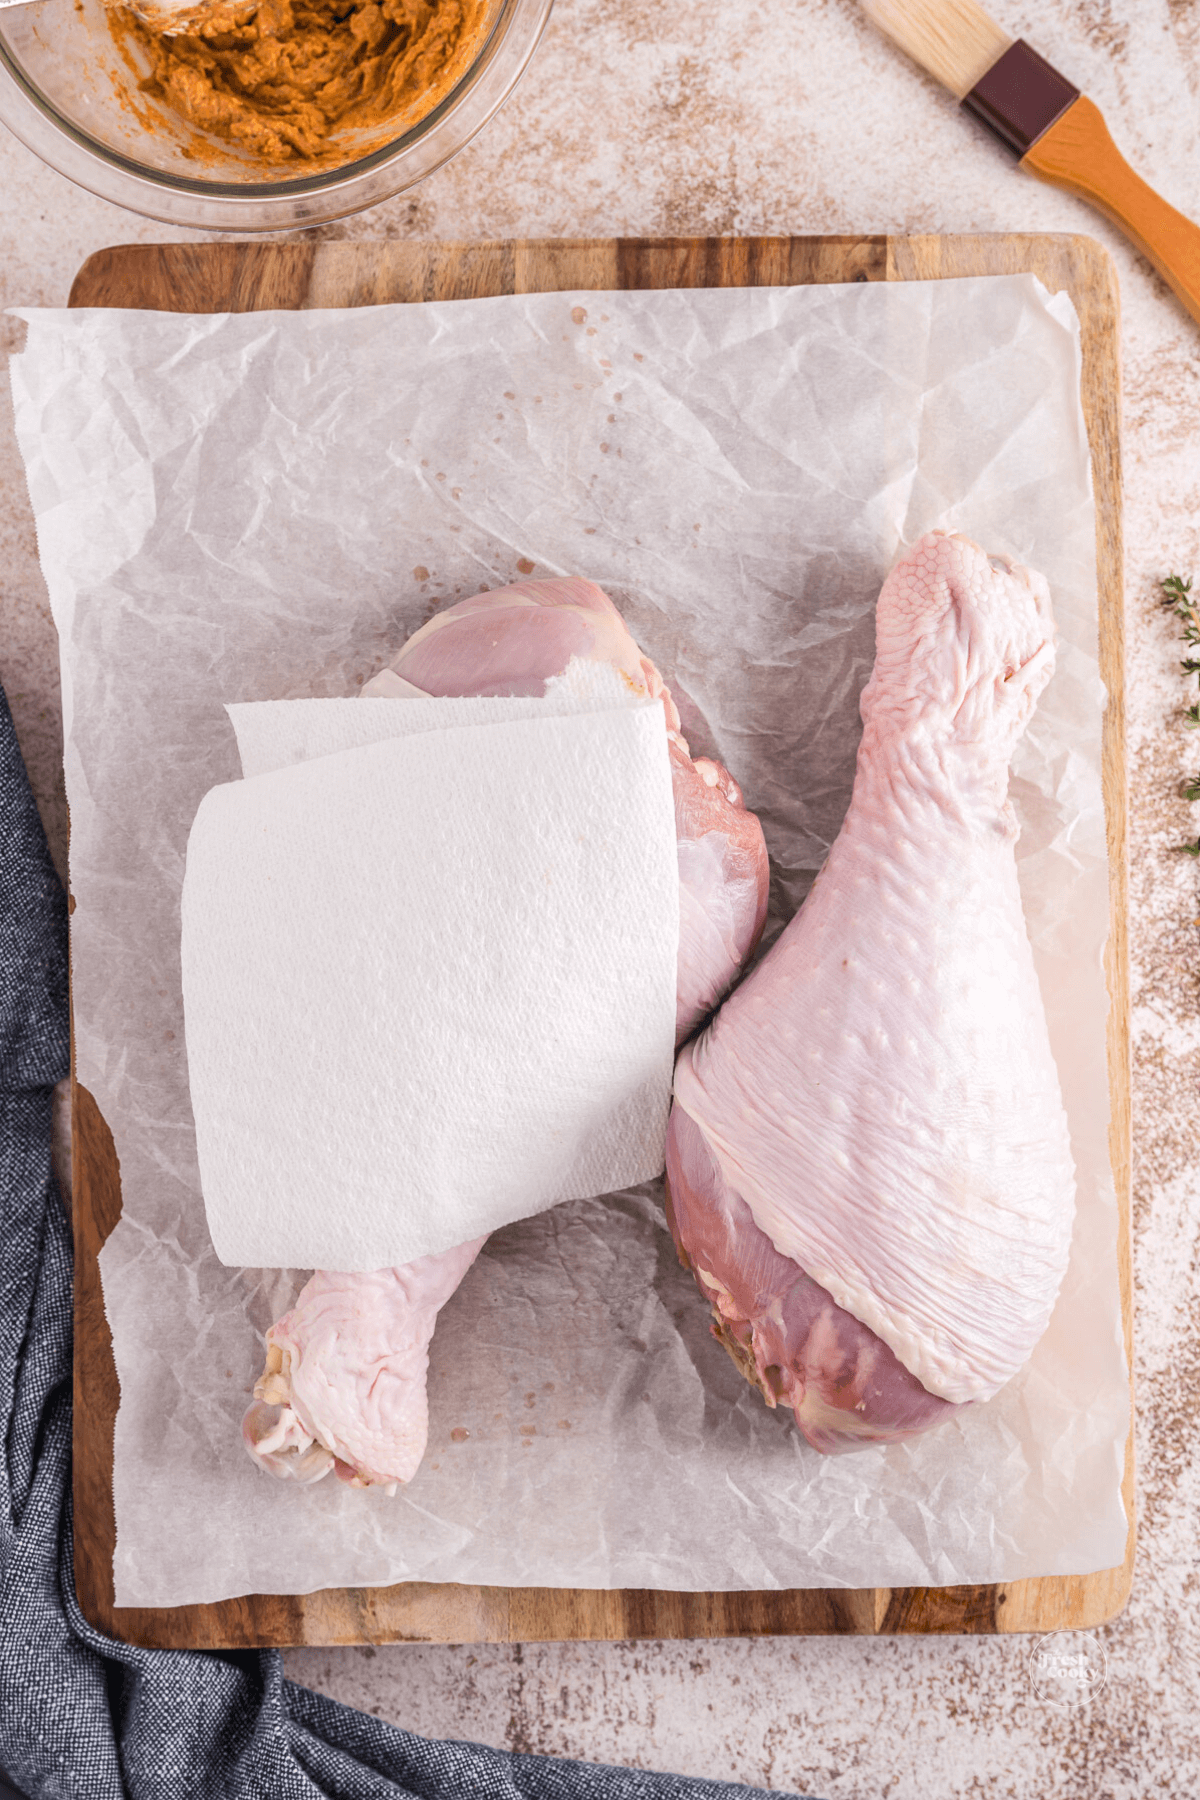 Patting turkey legs dry with paper towels. 